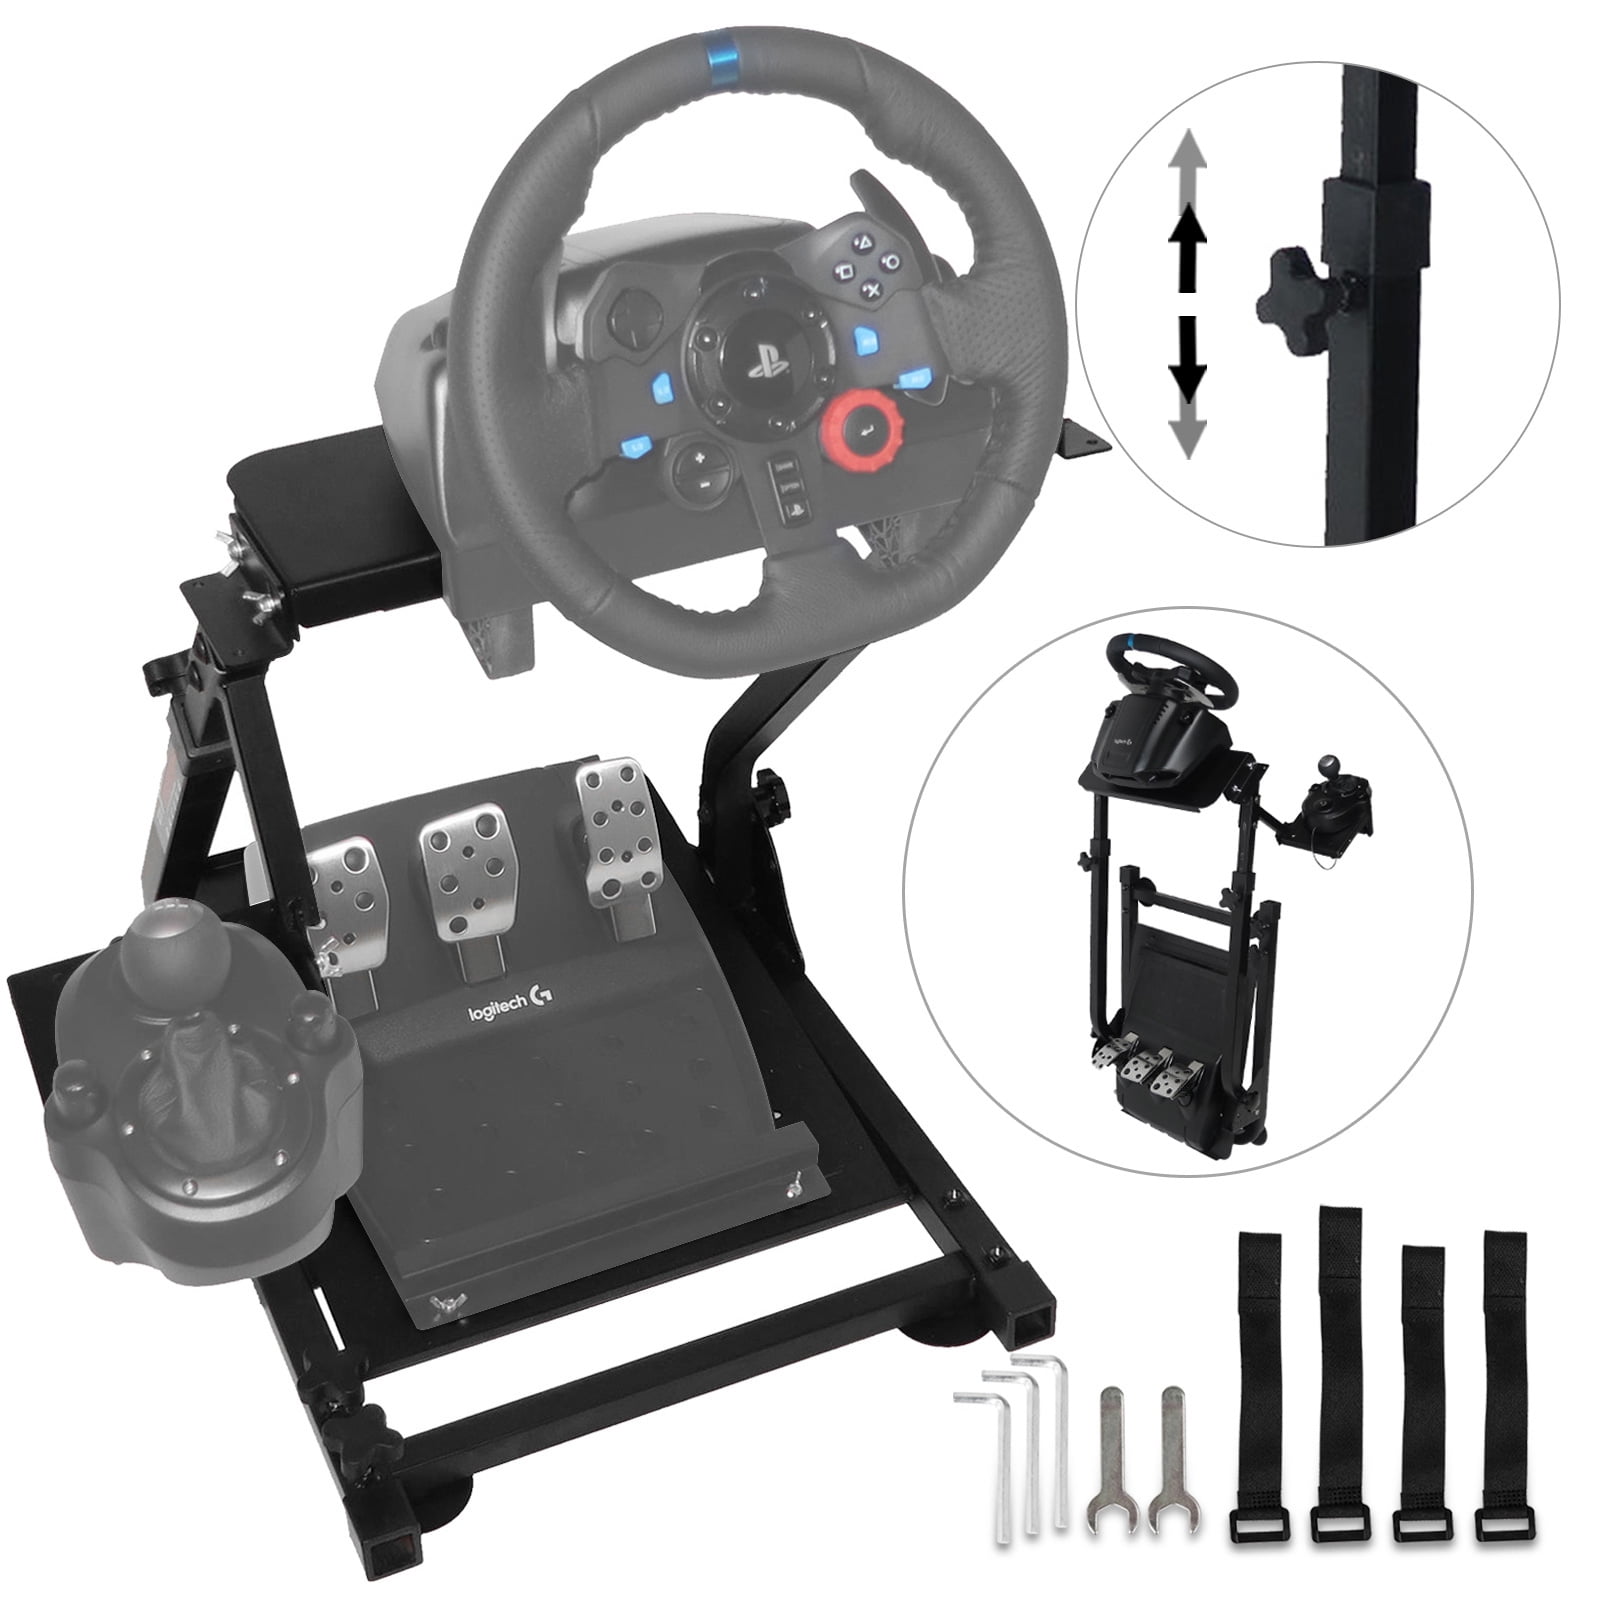 Marada Racing Wheel Stand for G25 G27 G29 and G920 Racing Steering Pro Stand Wheel and Pedals Not Included 